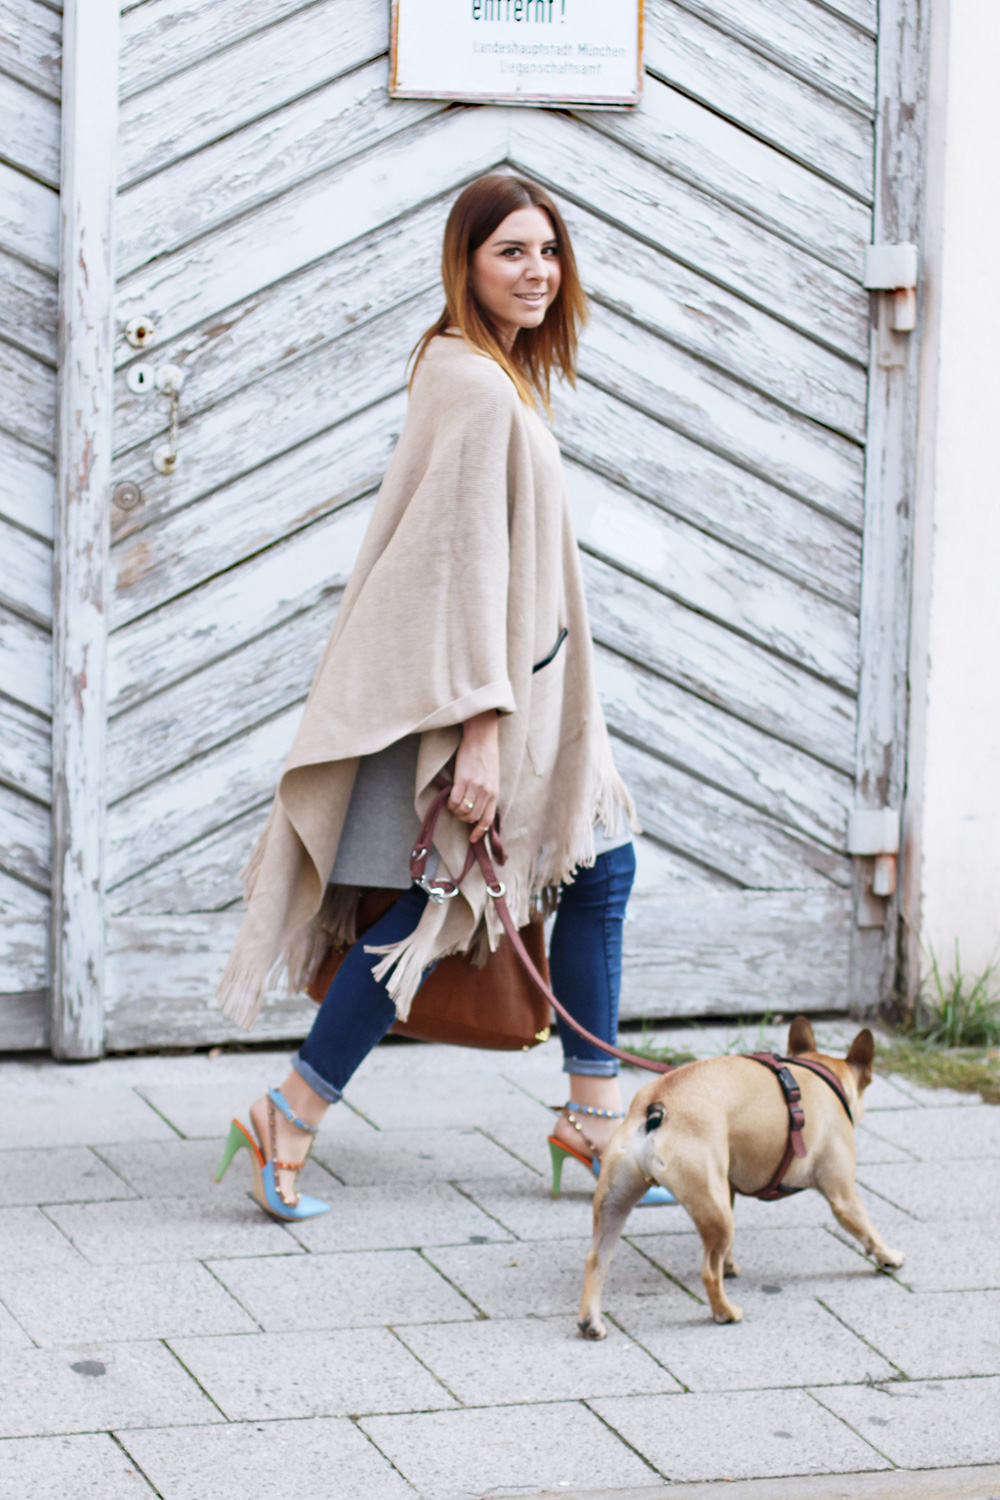 who is mocca, modeblog, fashionblog, cape kombinieren, valentino rocketed pumps, kimder tasche, frenchie, oversize outfit, layering look, whoismocca.com